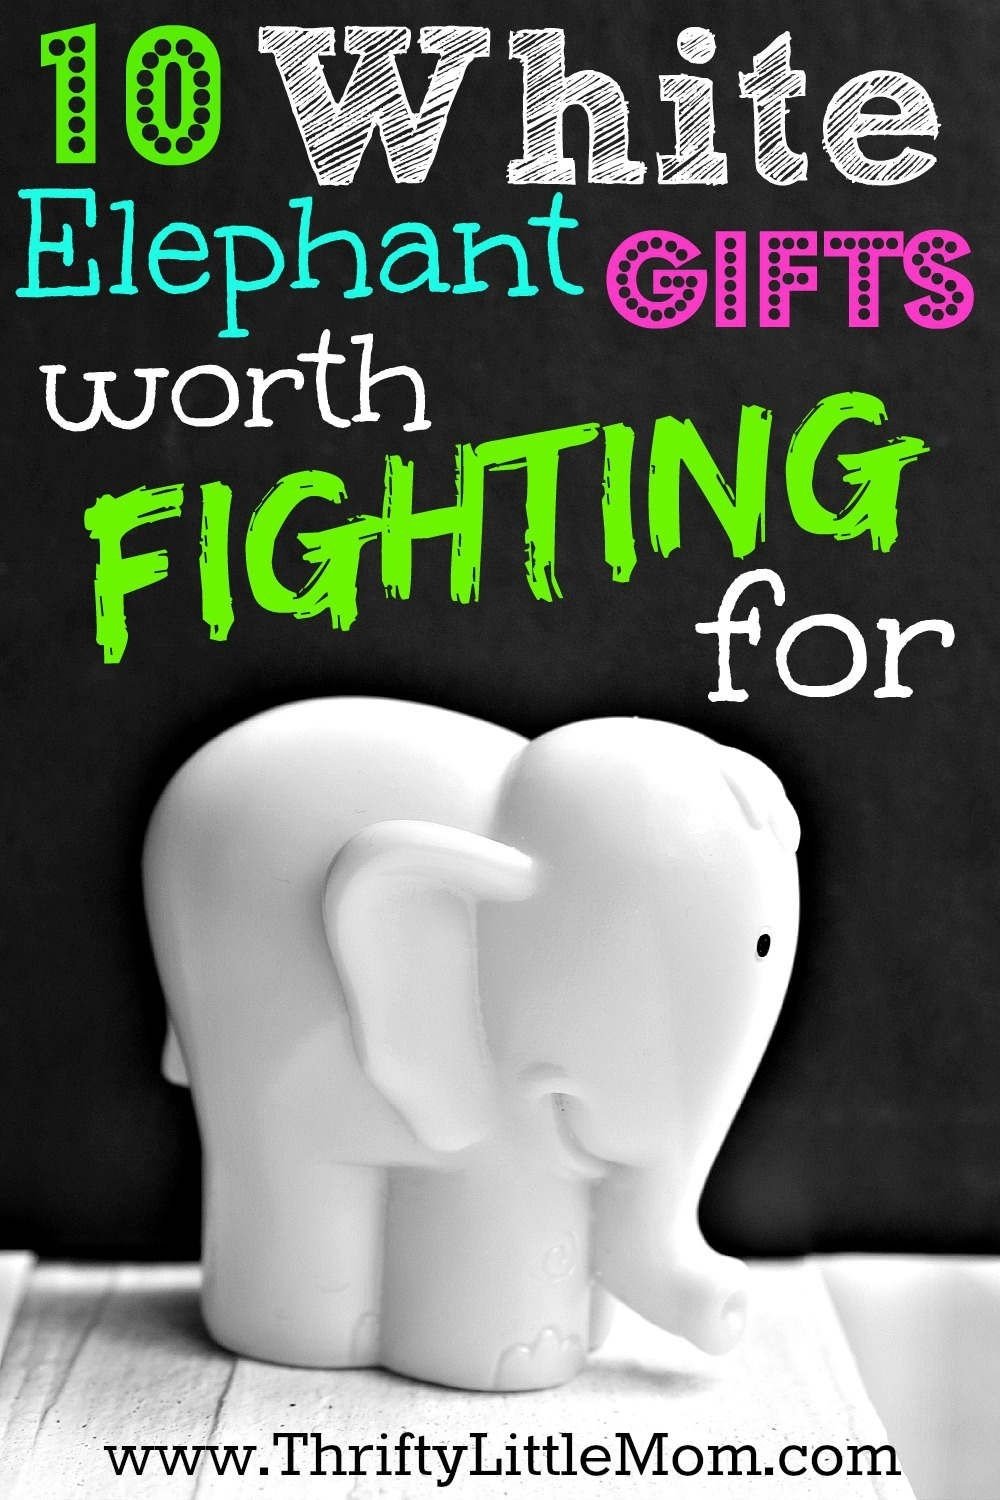 10 Stunning Gift Ideas For White Elephant white elephant gifts worth fighting for yankee swap ideas white 6 2022